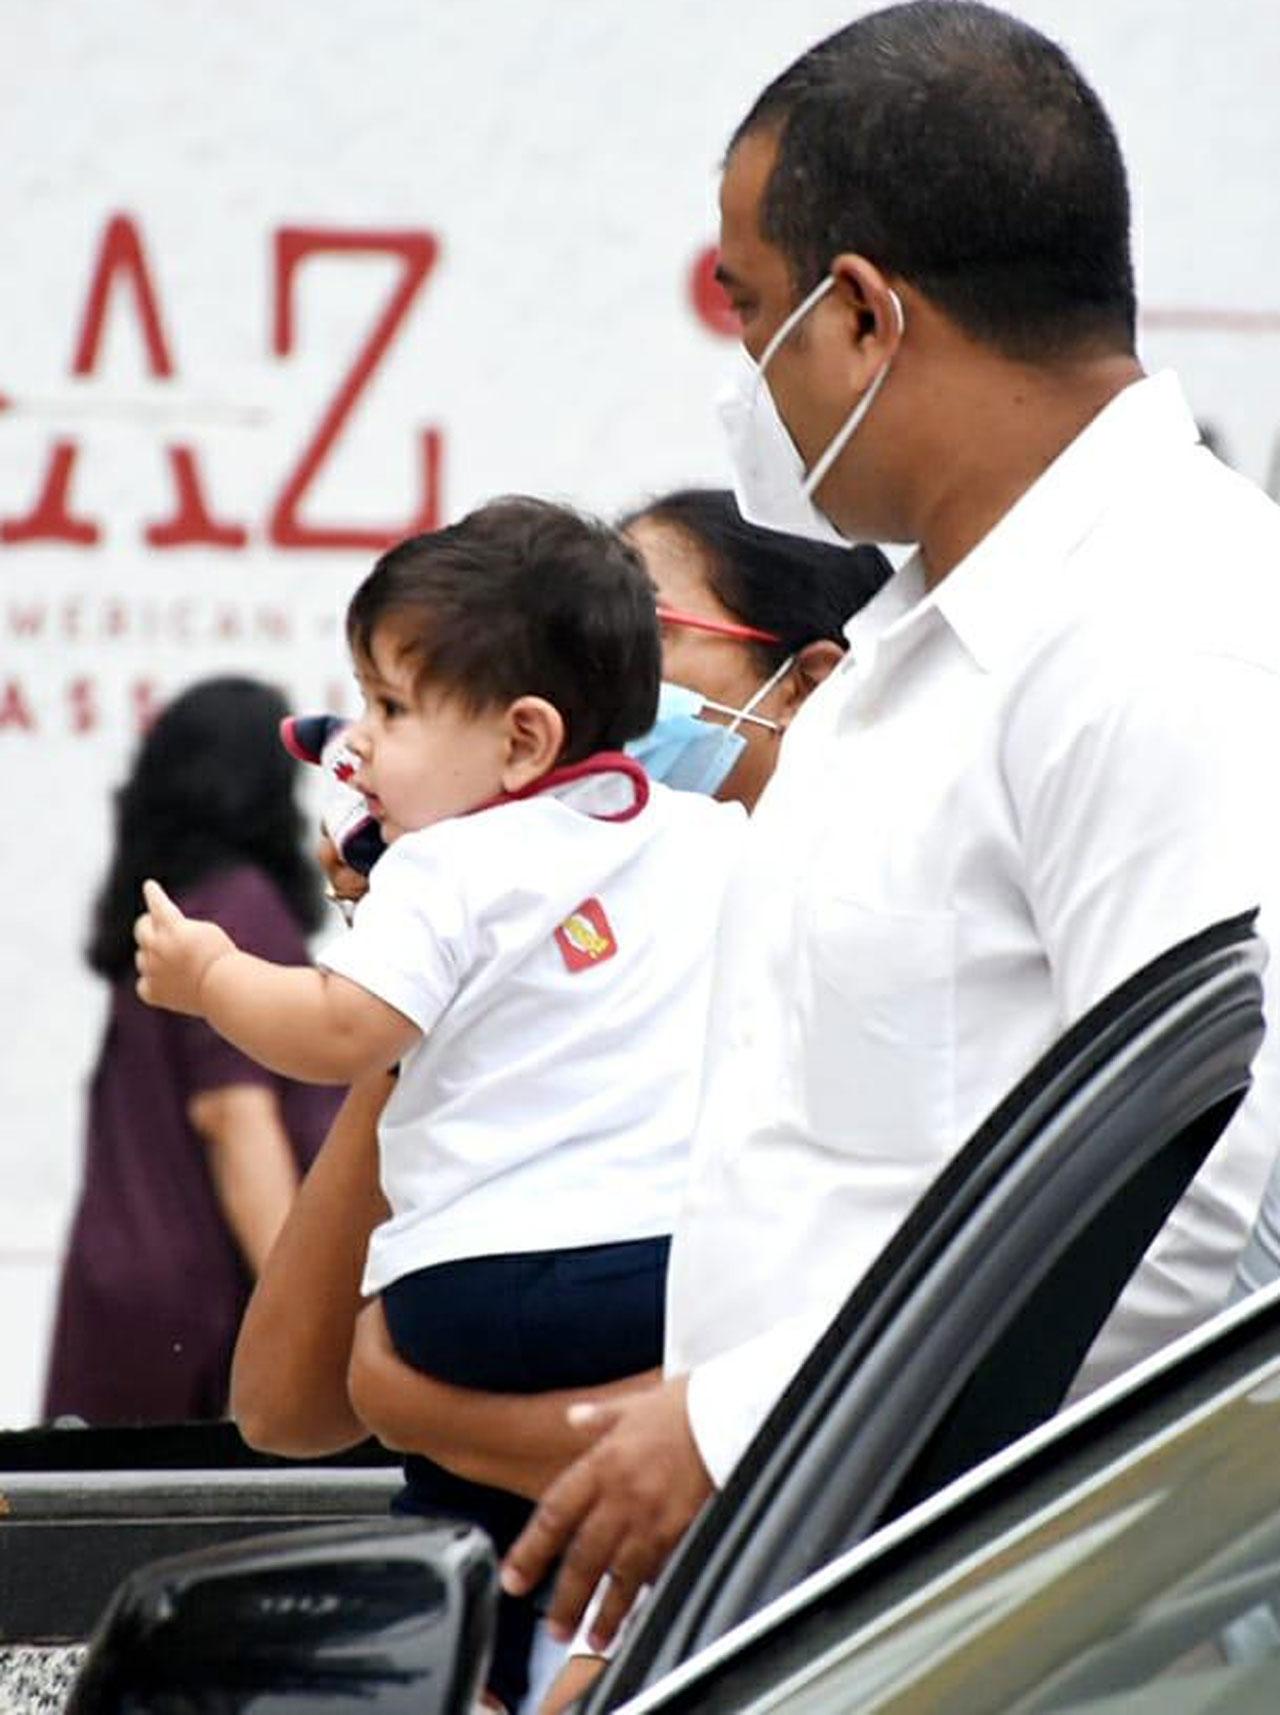 Arriving in all cuteness was the latest star kid and social media sensation on the block, Jehangir Ali Khan. The toddler was seen in a white shirt and those adorable cheeks have truly made our day.